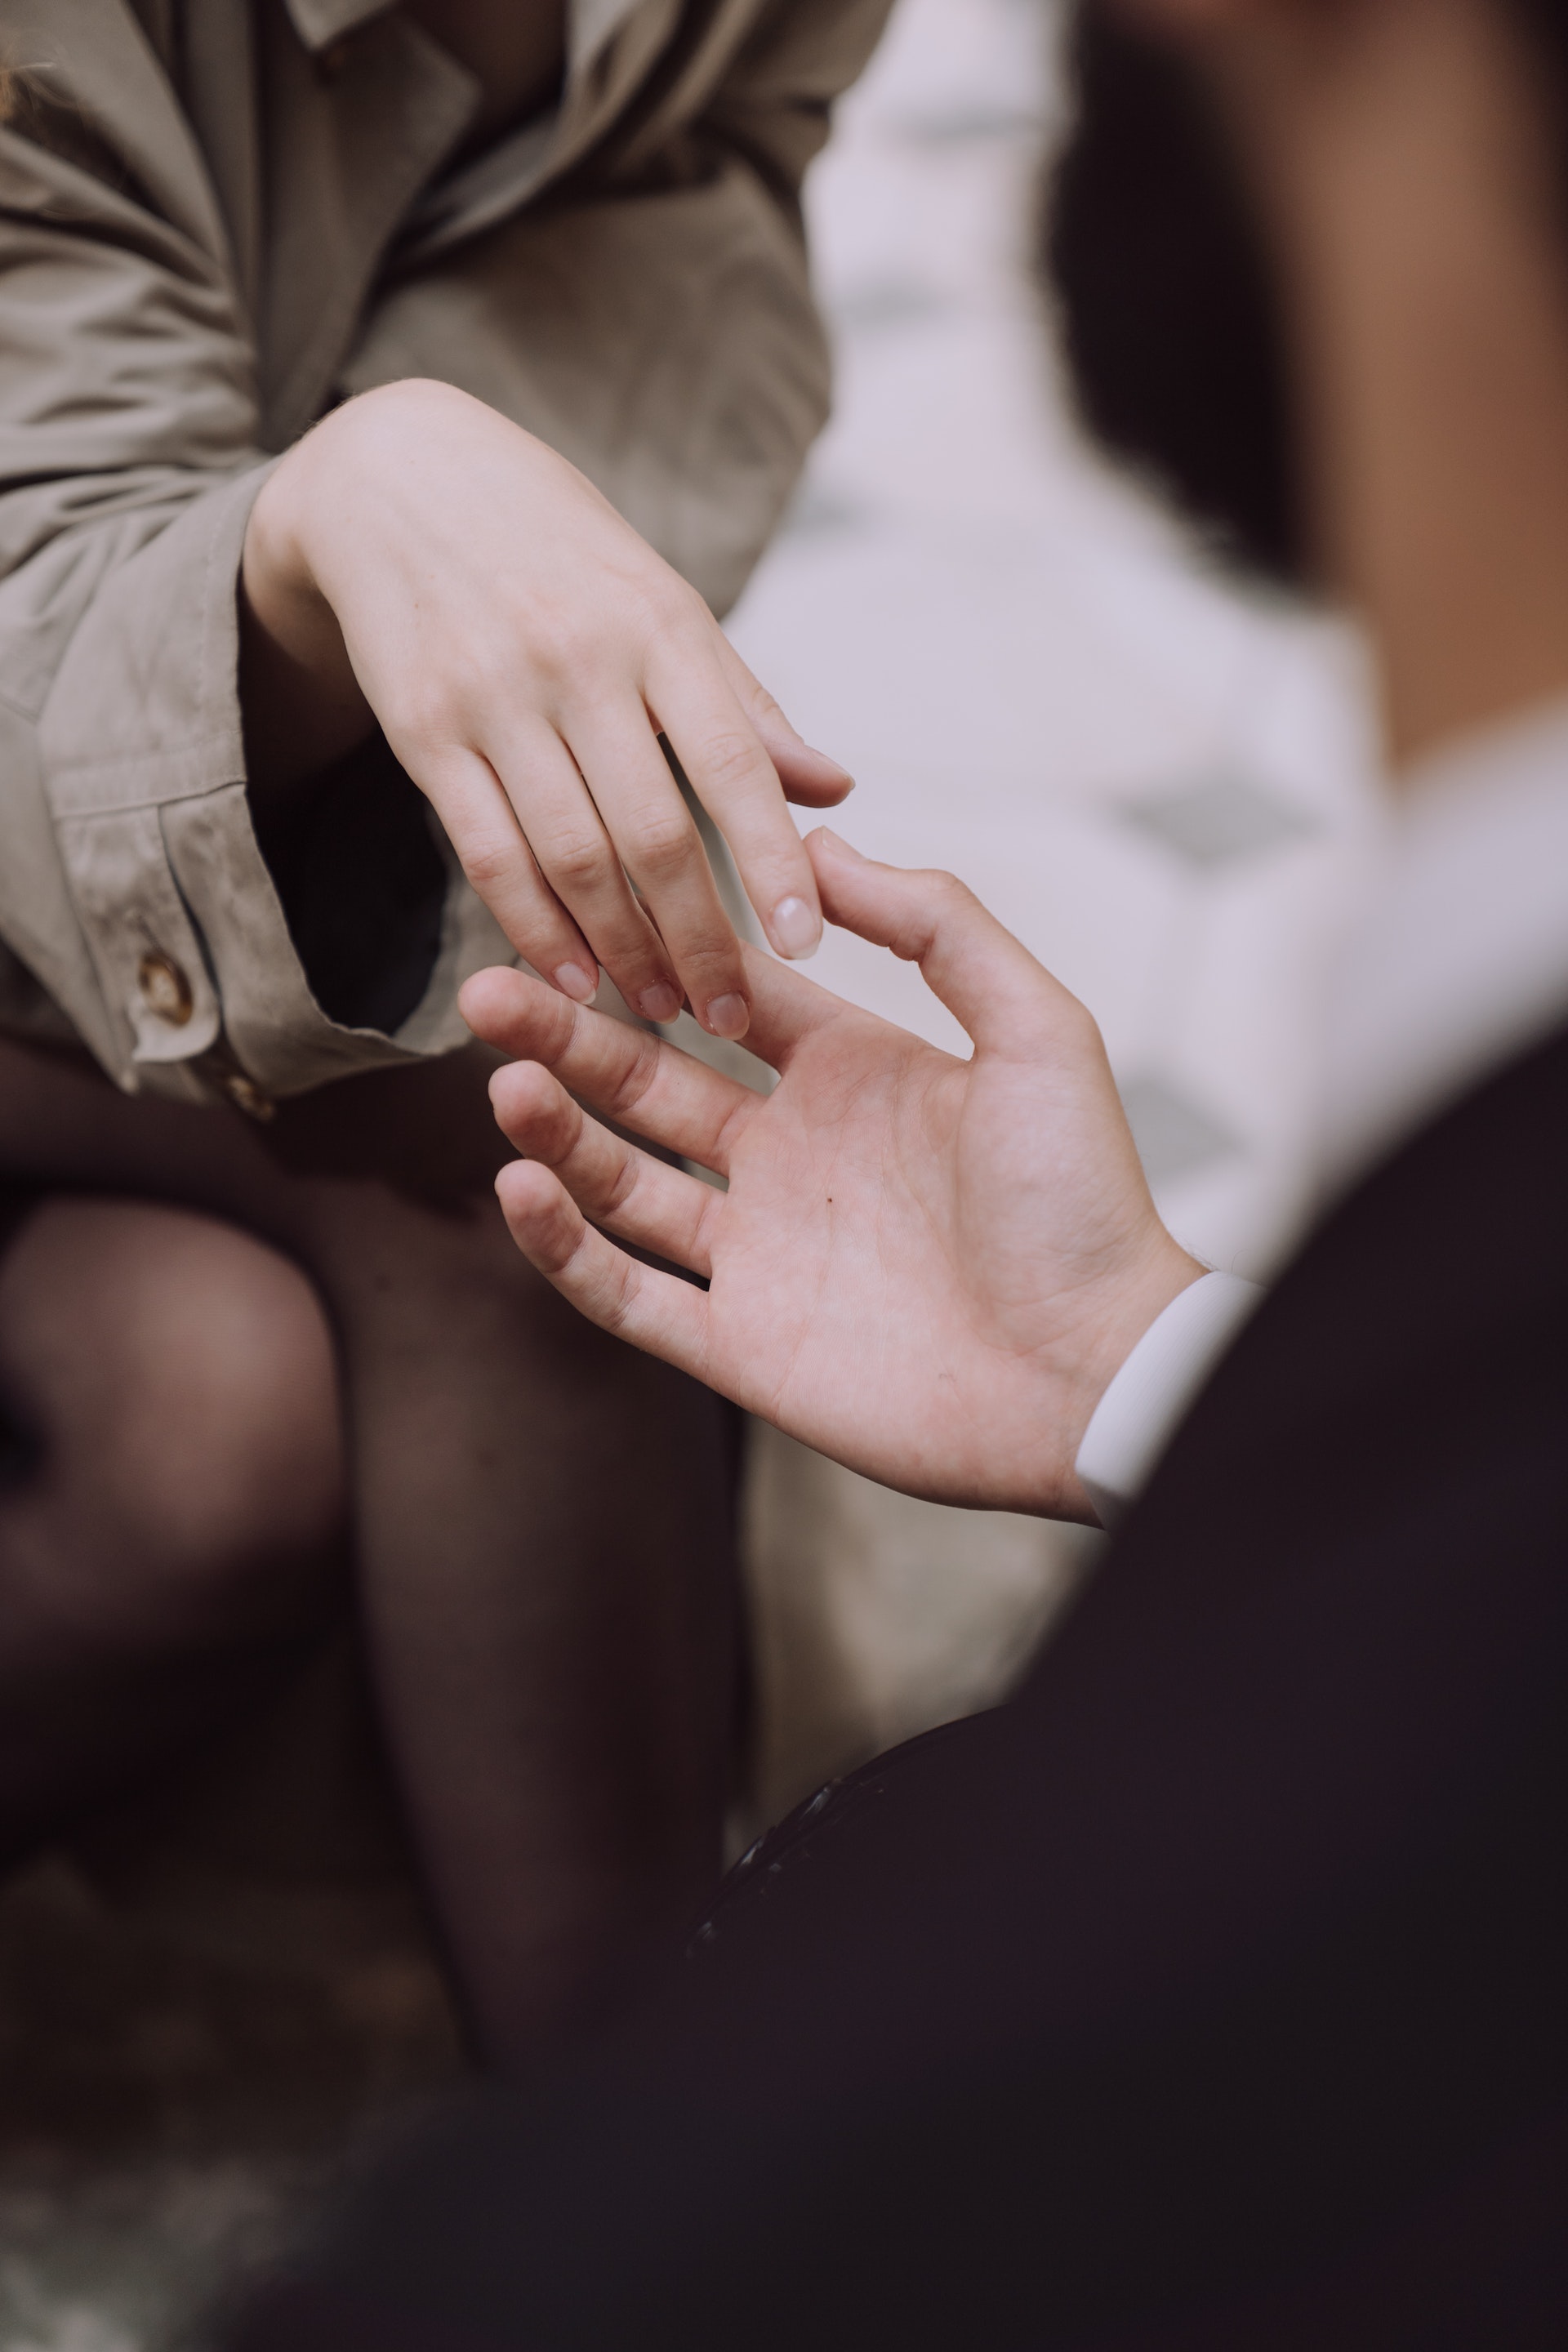 A man holding a woman's hand | Source: Pexels